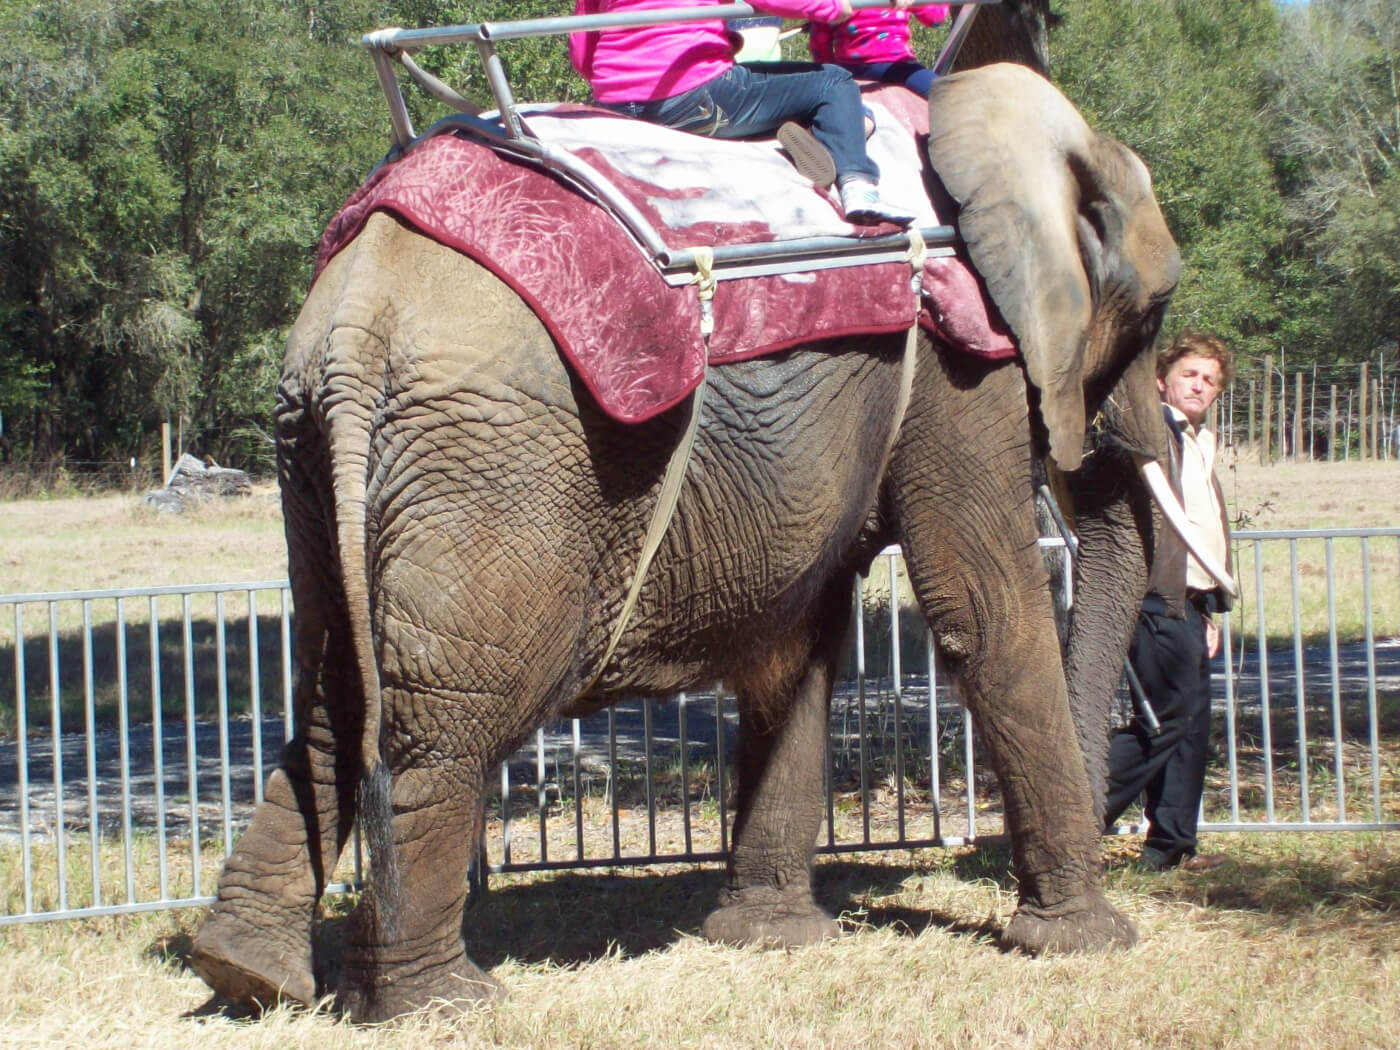 Why Elephant Rides Are Wrong | PETA Kids